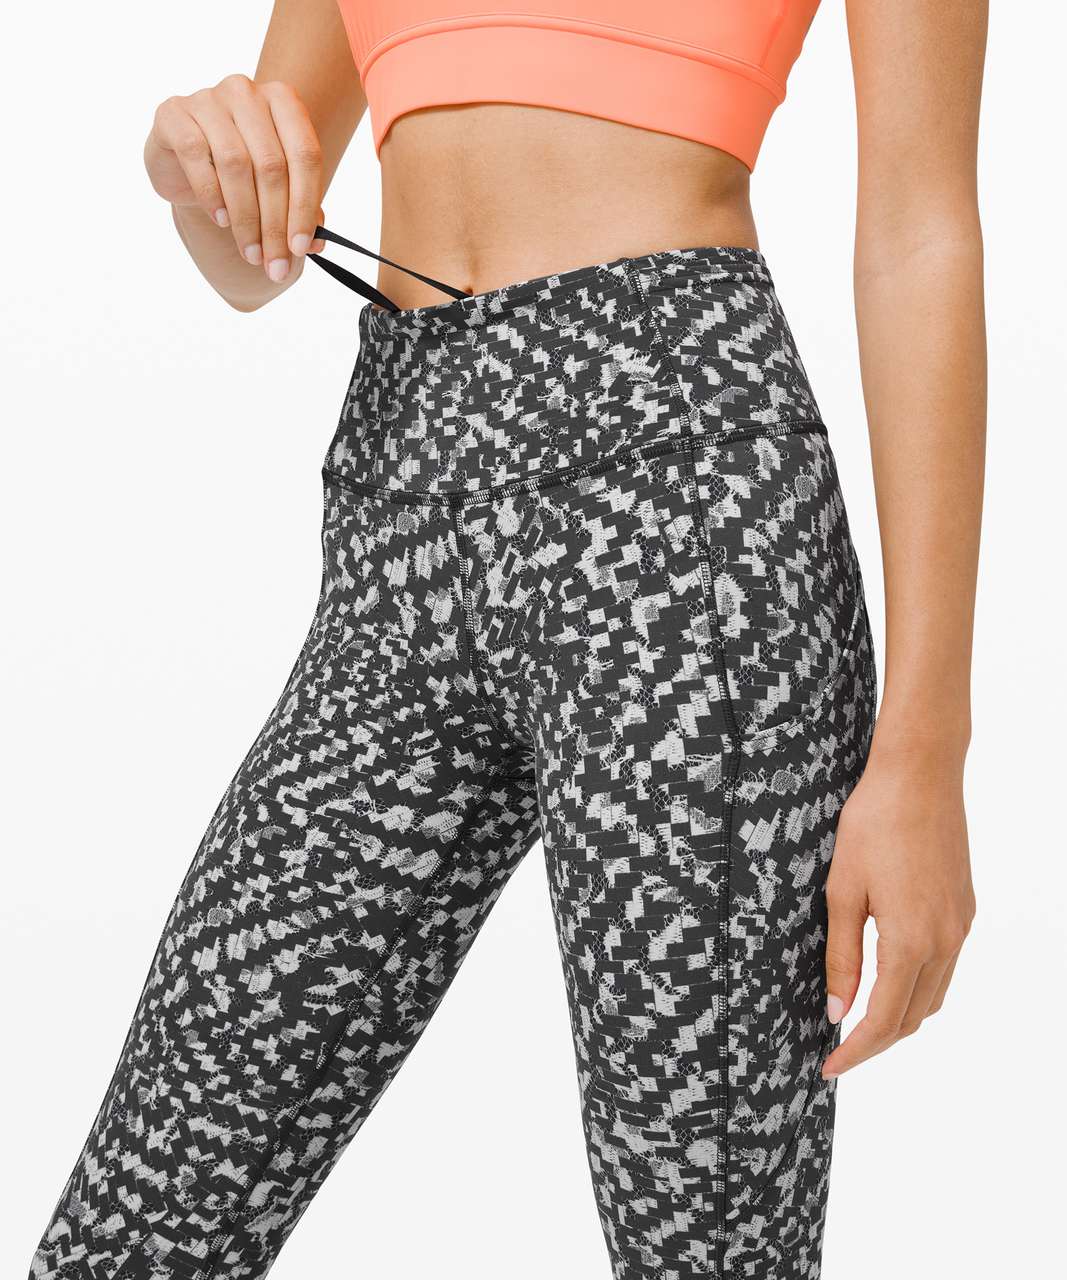 Lululemon Fast and Free Tight II 25" *Non-Reflective Nulux - Pace Lace Graphite Grey Multi